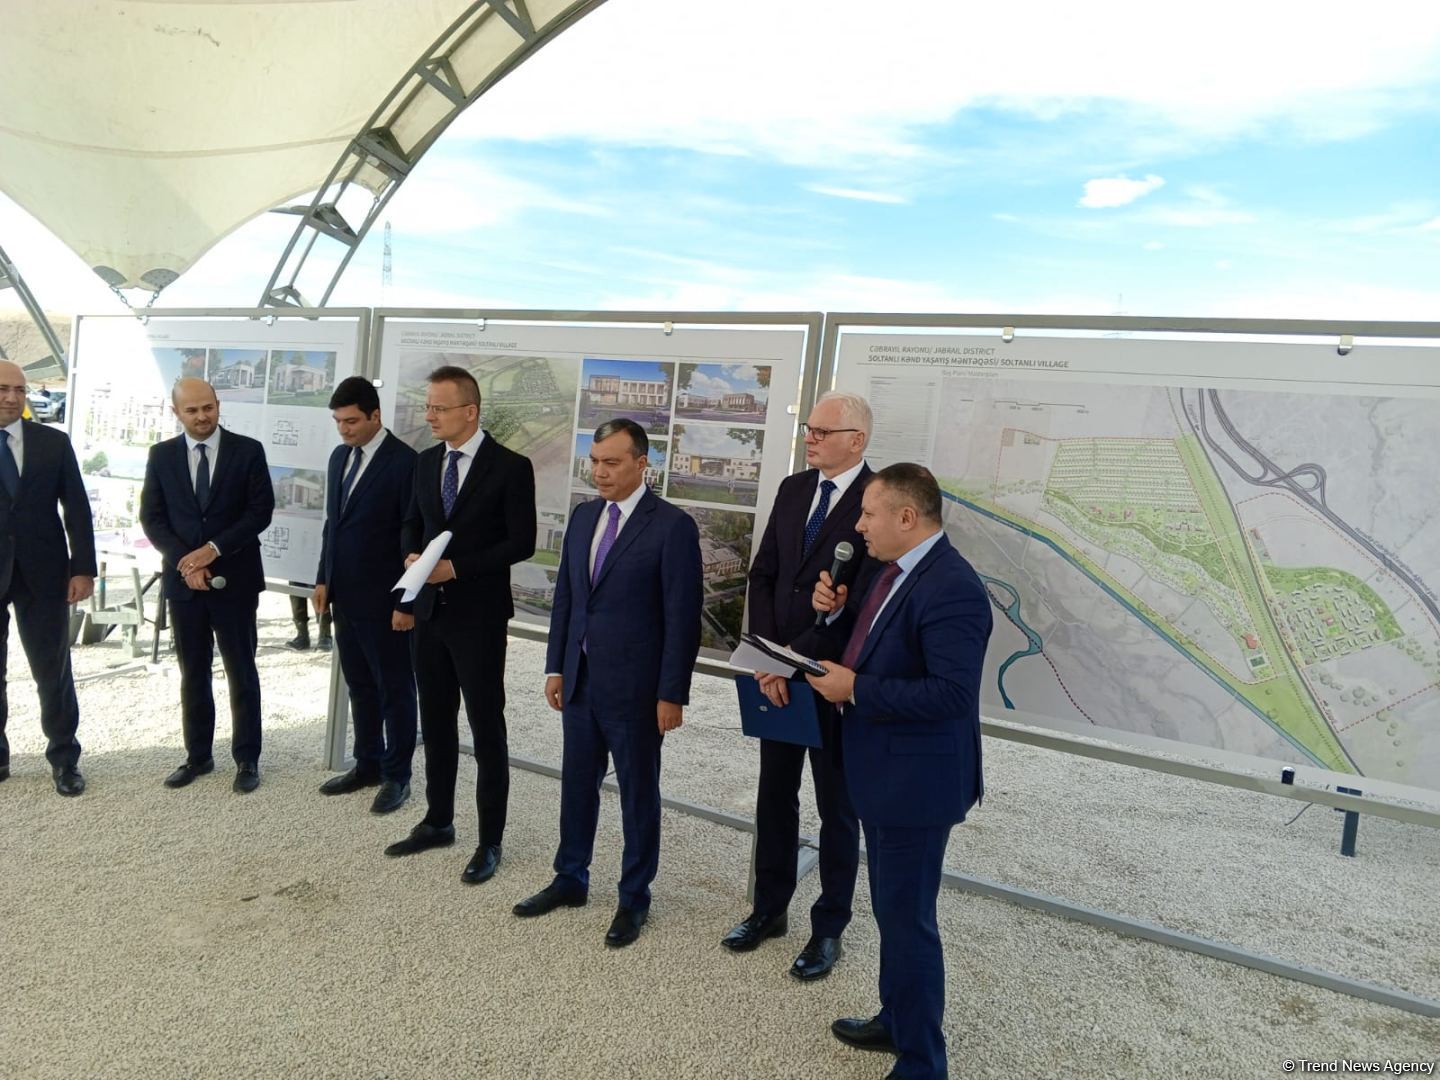 Azerbaijan holds foundation laying ceremony for Soltanli village in Jabrayil district (PHOTO)